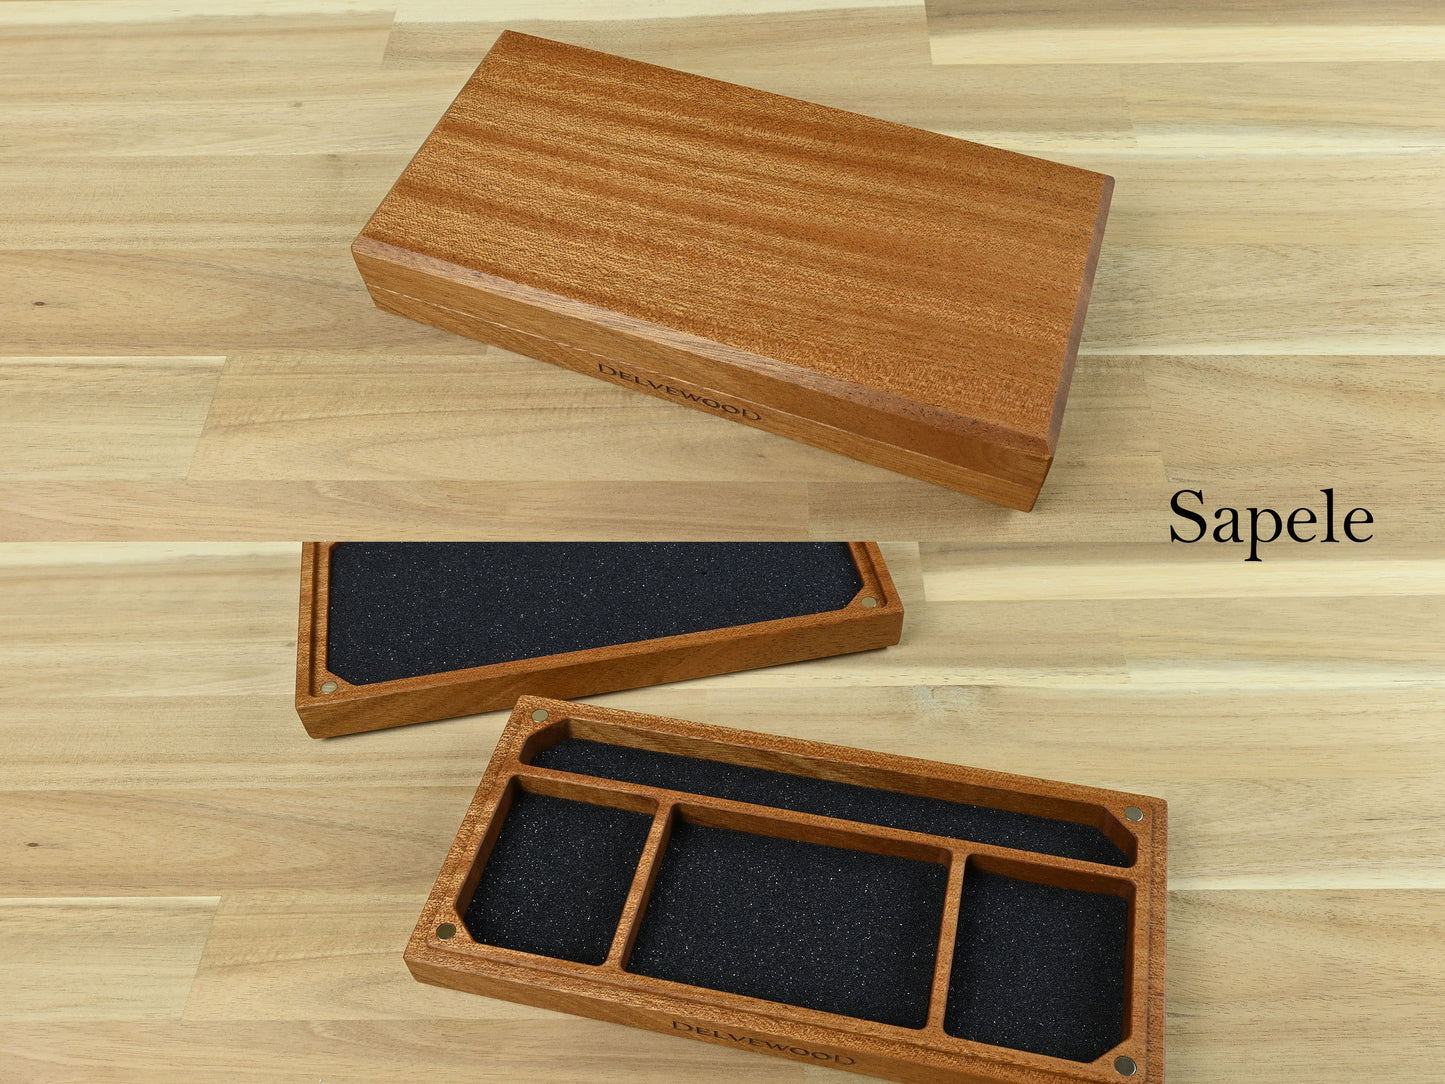 Sapele example Delver Dice Box and Tray for dnd rpg